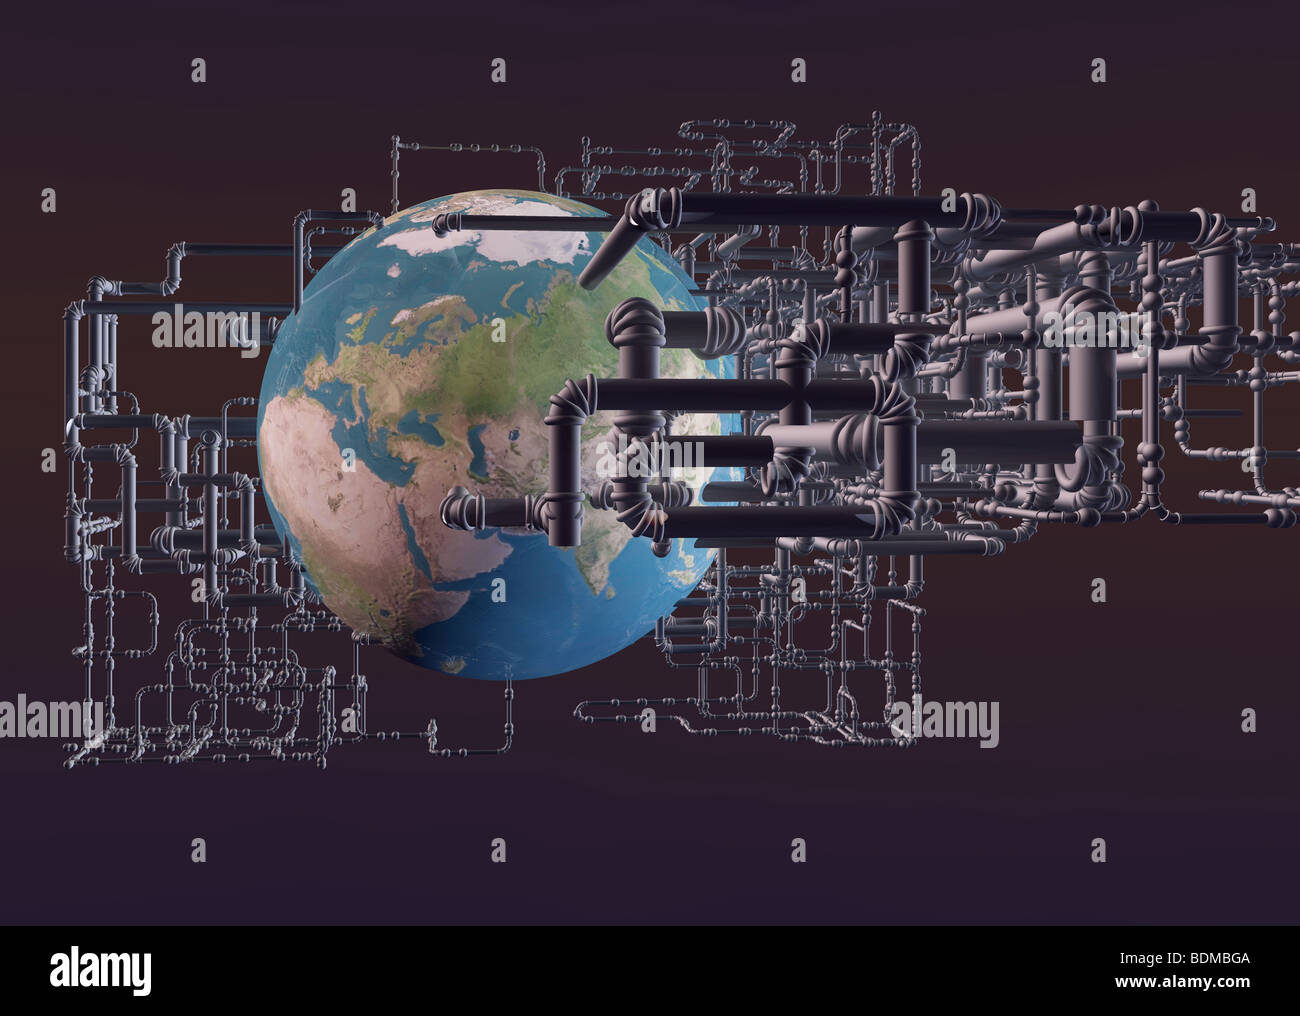 computer graphic image of the planet earth surrounded by a network of pipes, suggesting toxic waste or oil refineries Stock Photo